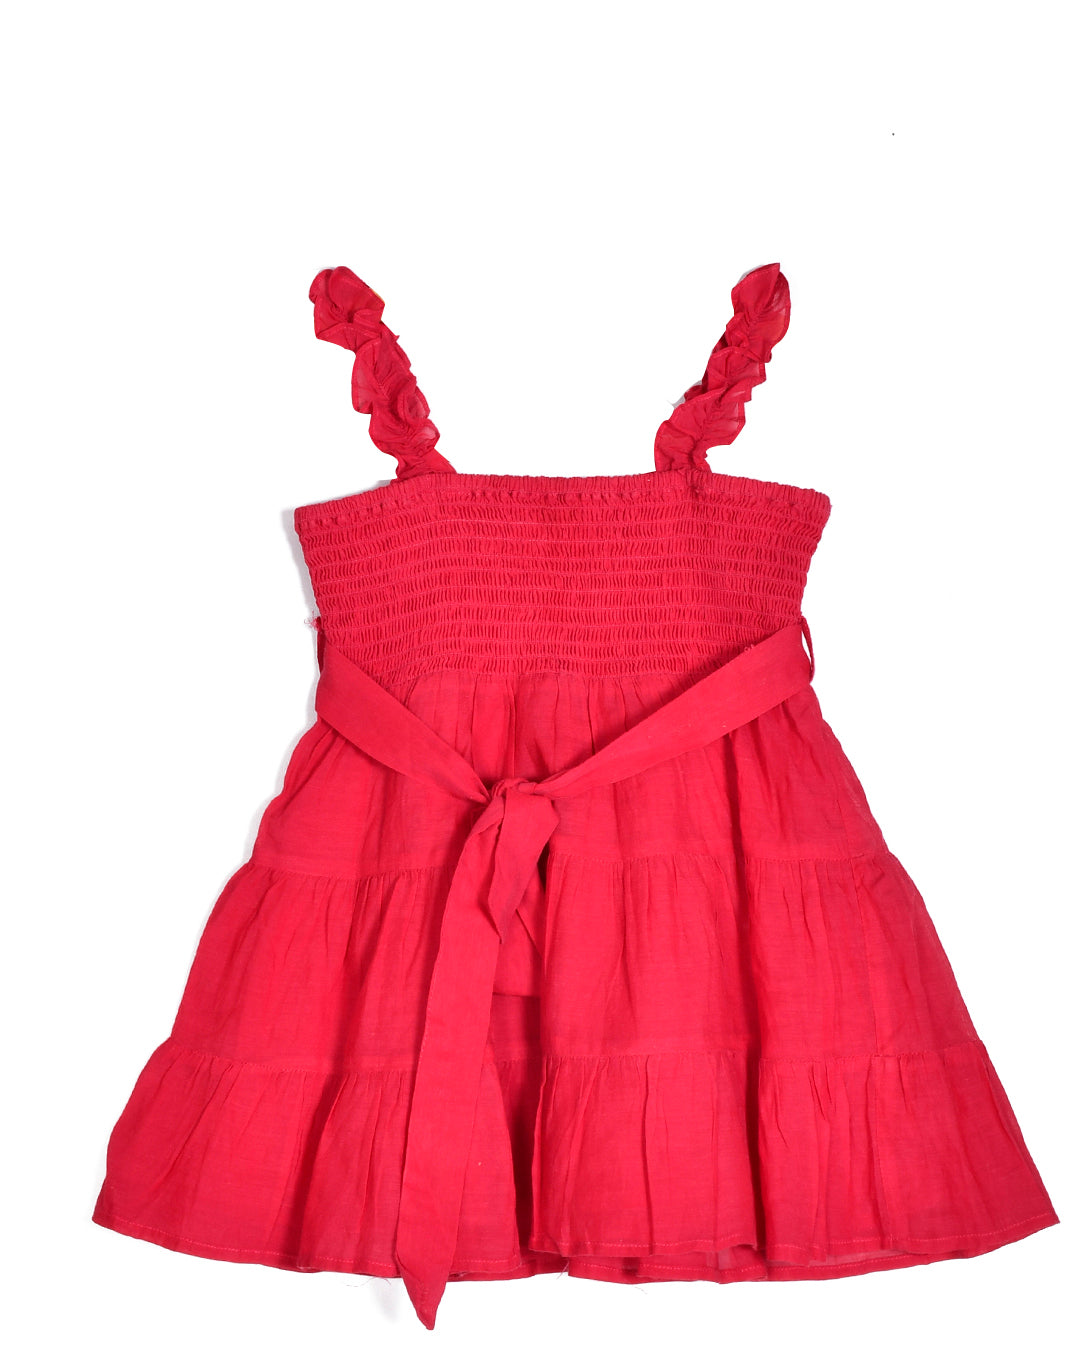 FUCHSIA DRESS WITH A FRONT BOW AND SMOCKING